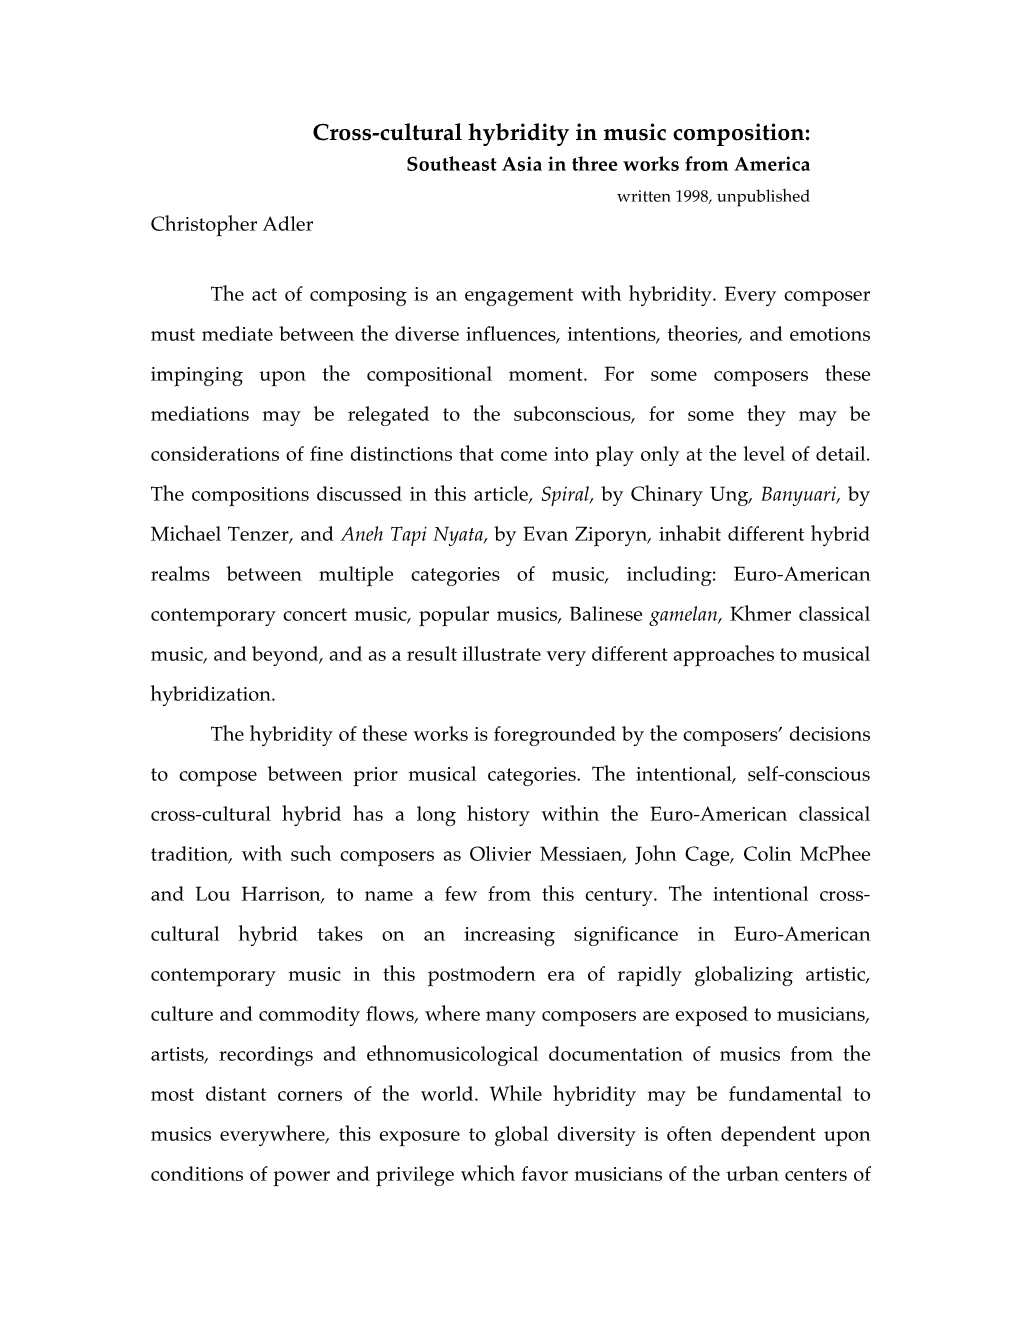 Cross-Cultural Hybridity in Music Composition: Southeast Asia in Three Works from America Written 1998, Unpublished Christopher Adler